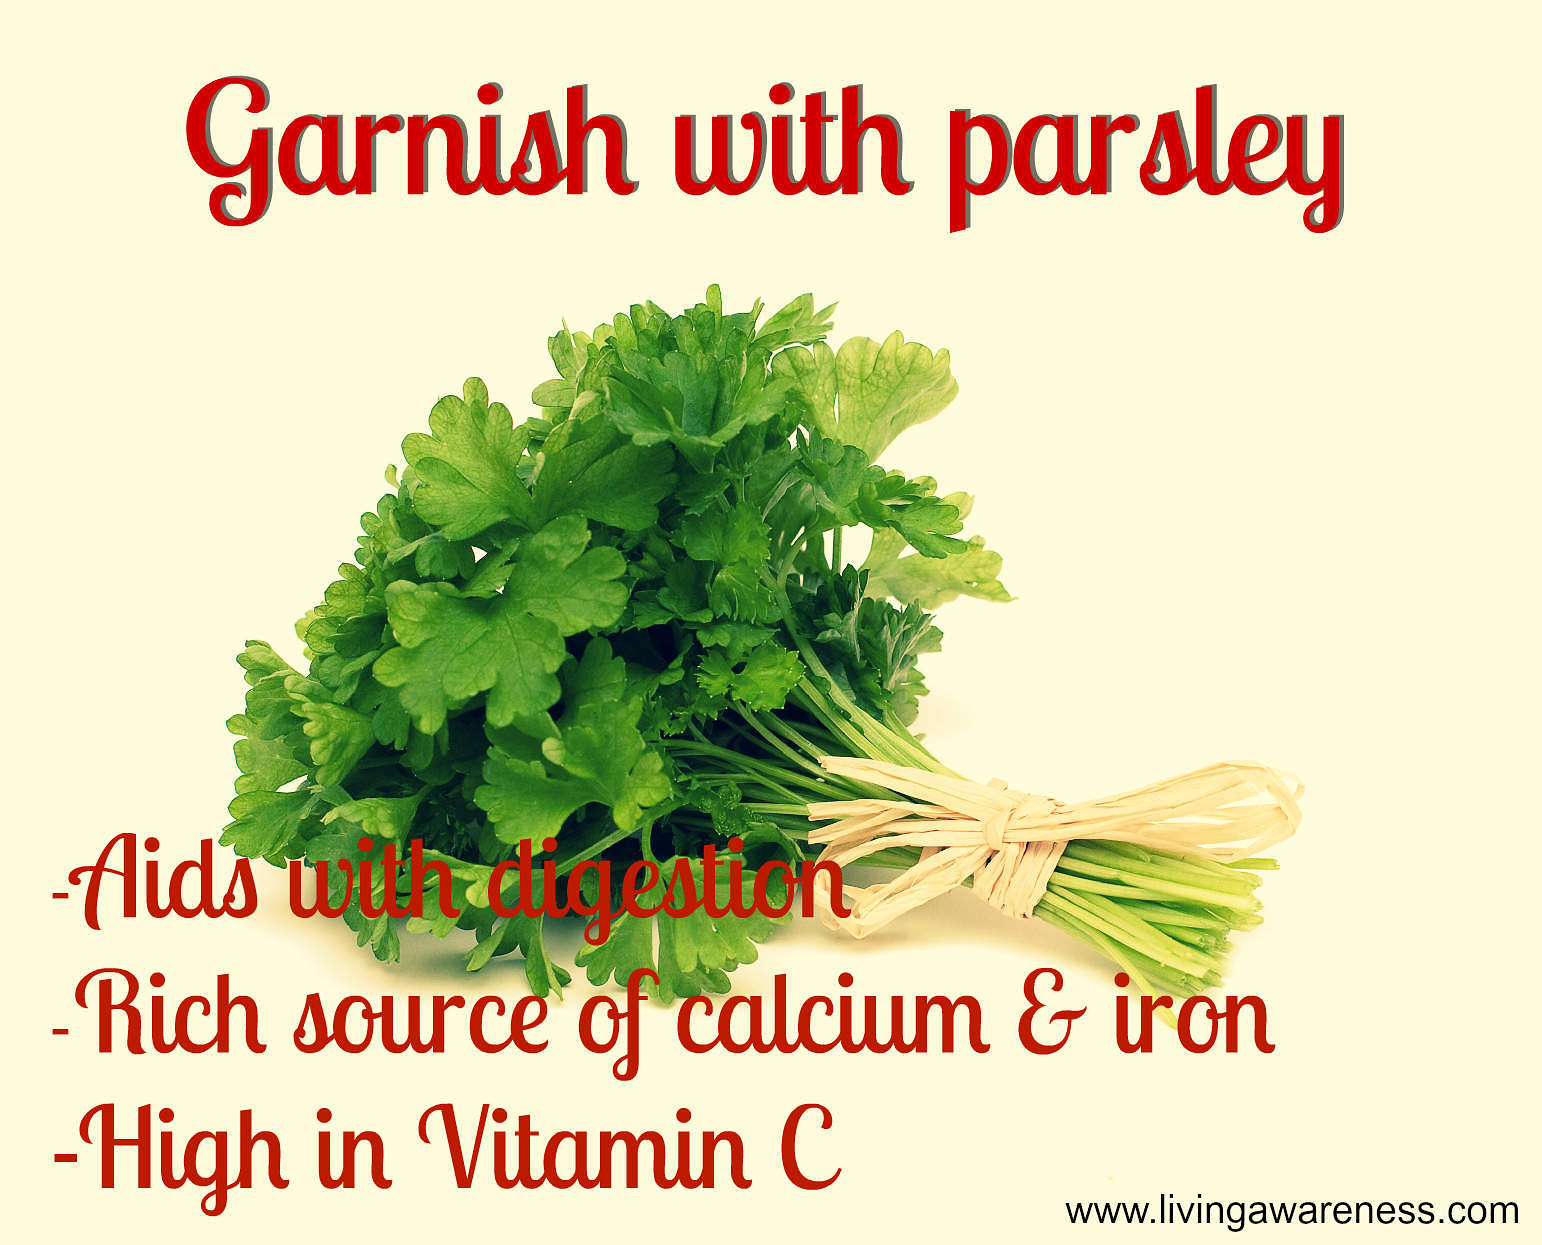 Why You Should Garnish with Parsley